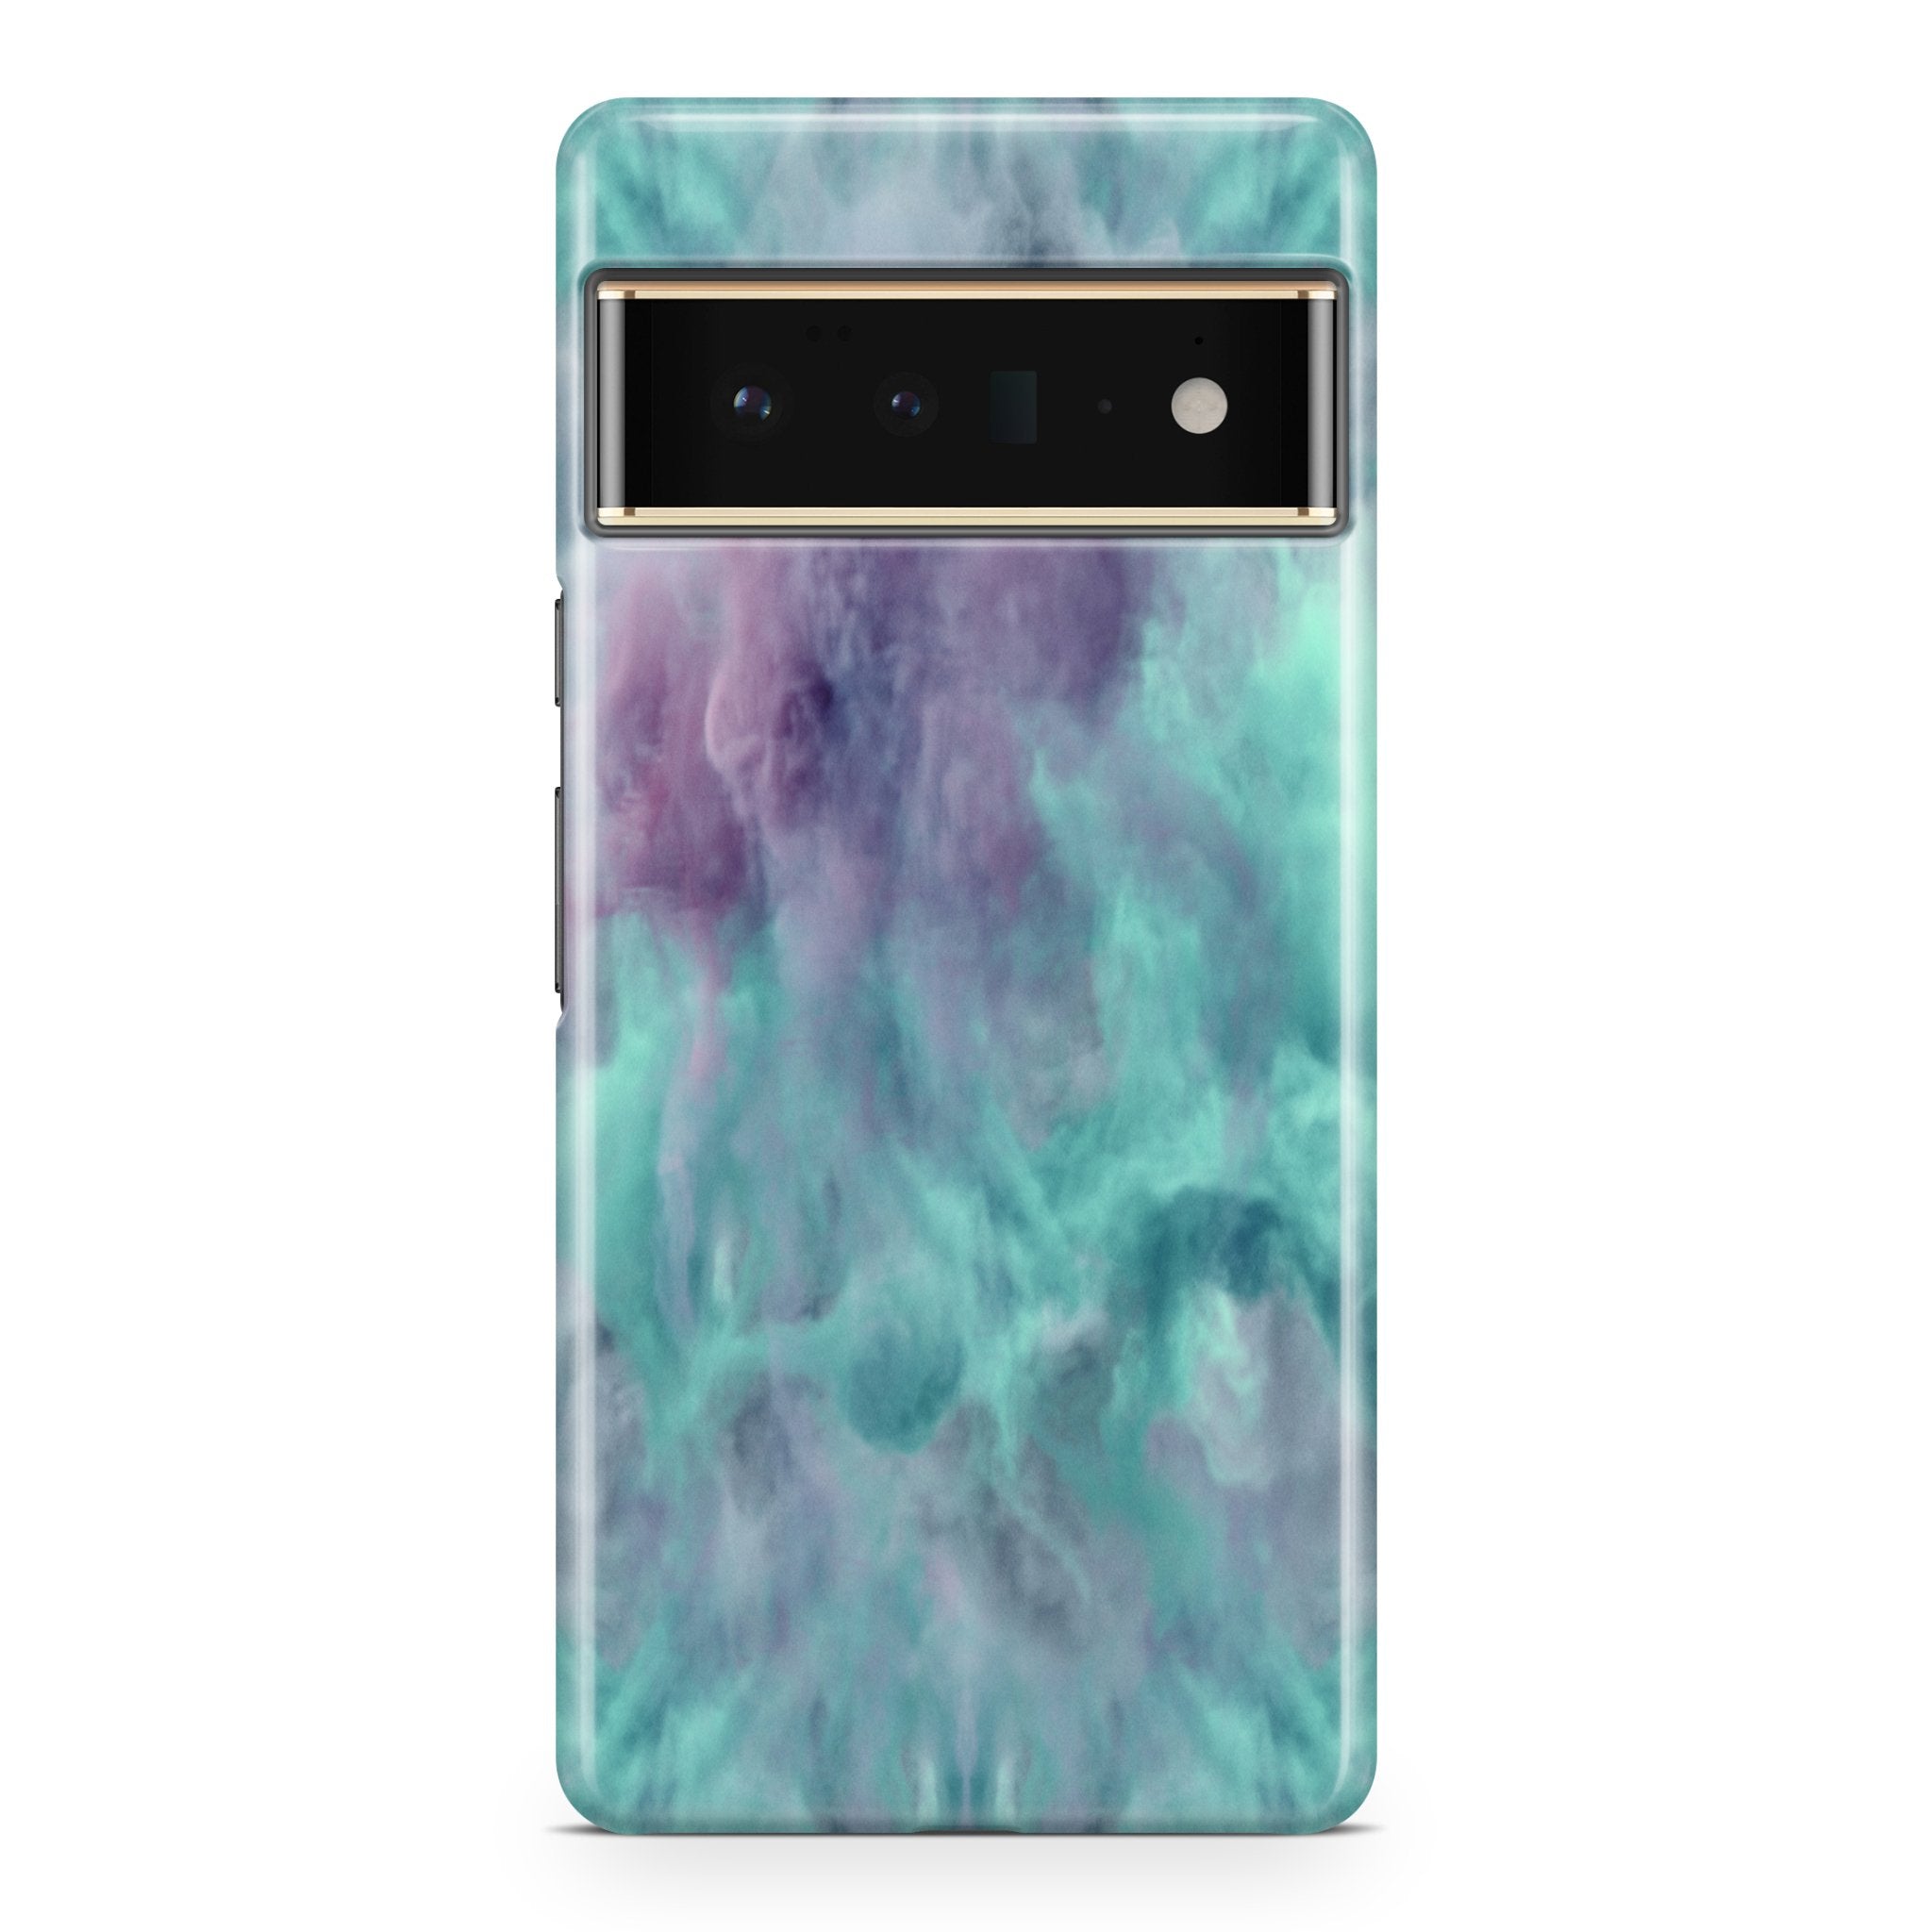 Turquoise Smoke Cloud - Google phone case designs by CaseSwagger